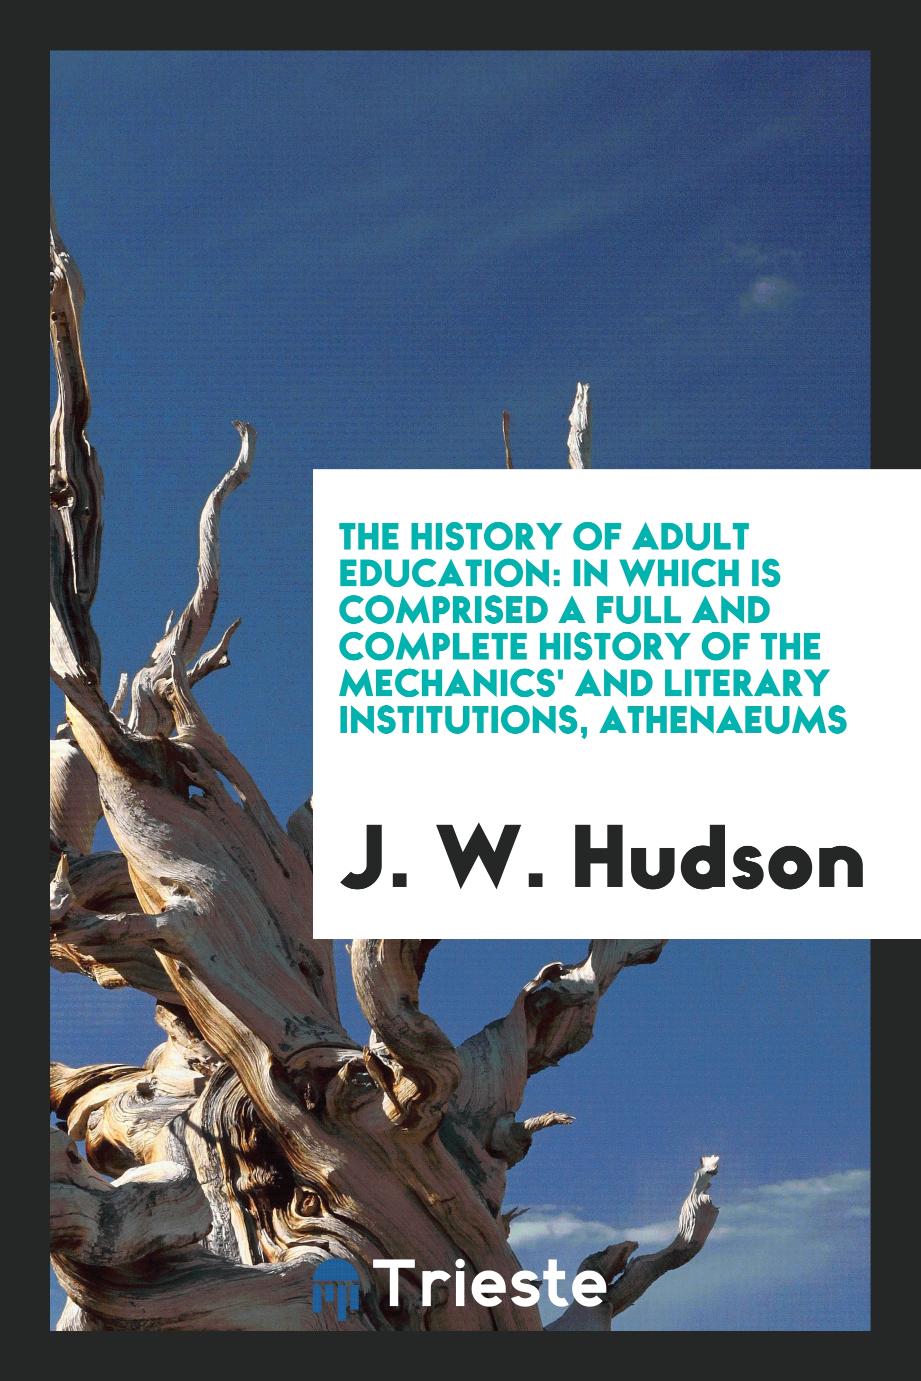 The History of Adult Education: In Which Is Comprised a Full and Complete History of the Mechanics' and Literary Institutions, Athenaeums